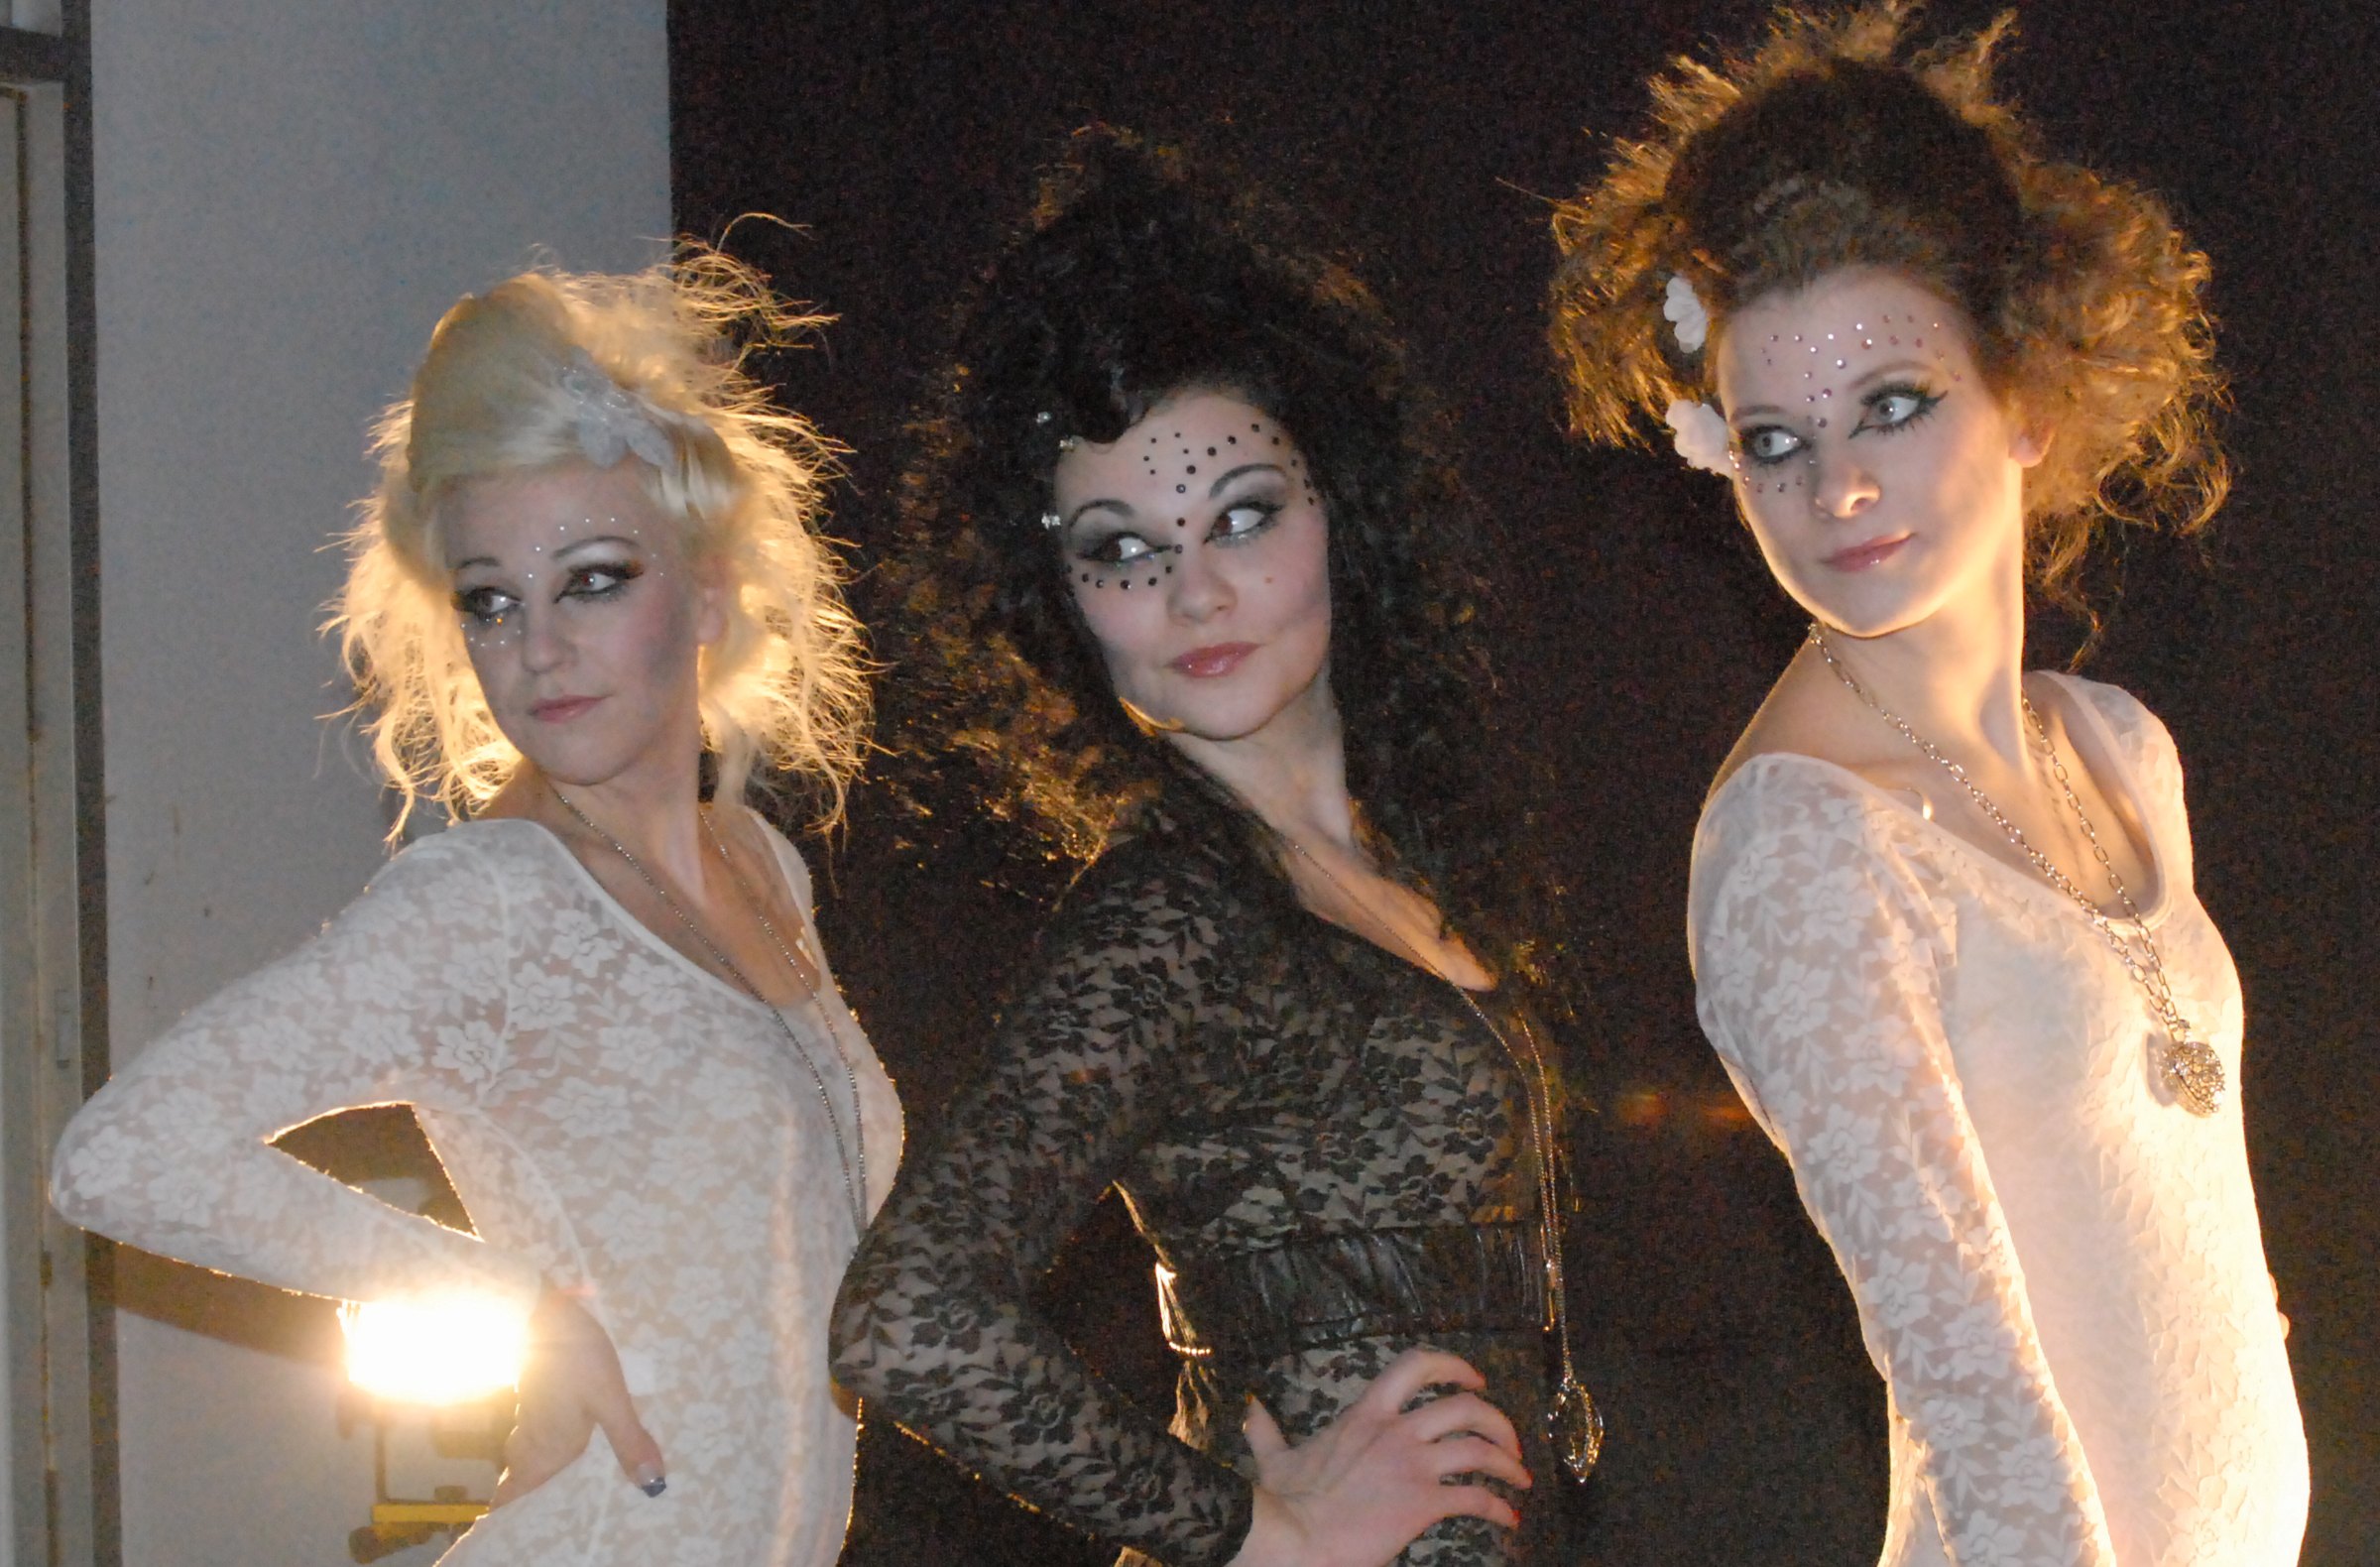 HAIR TODAY- A group of models from Academy of Professional Hair Design’s hair competition